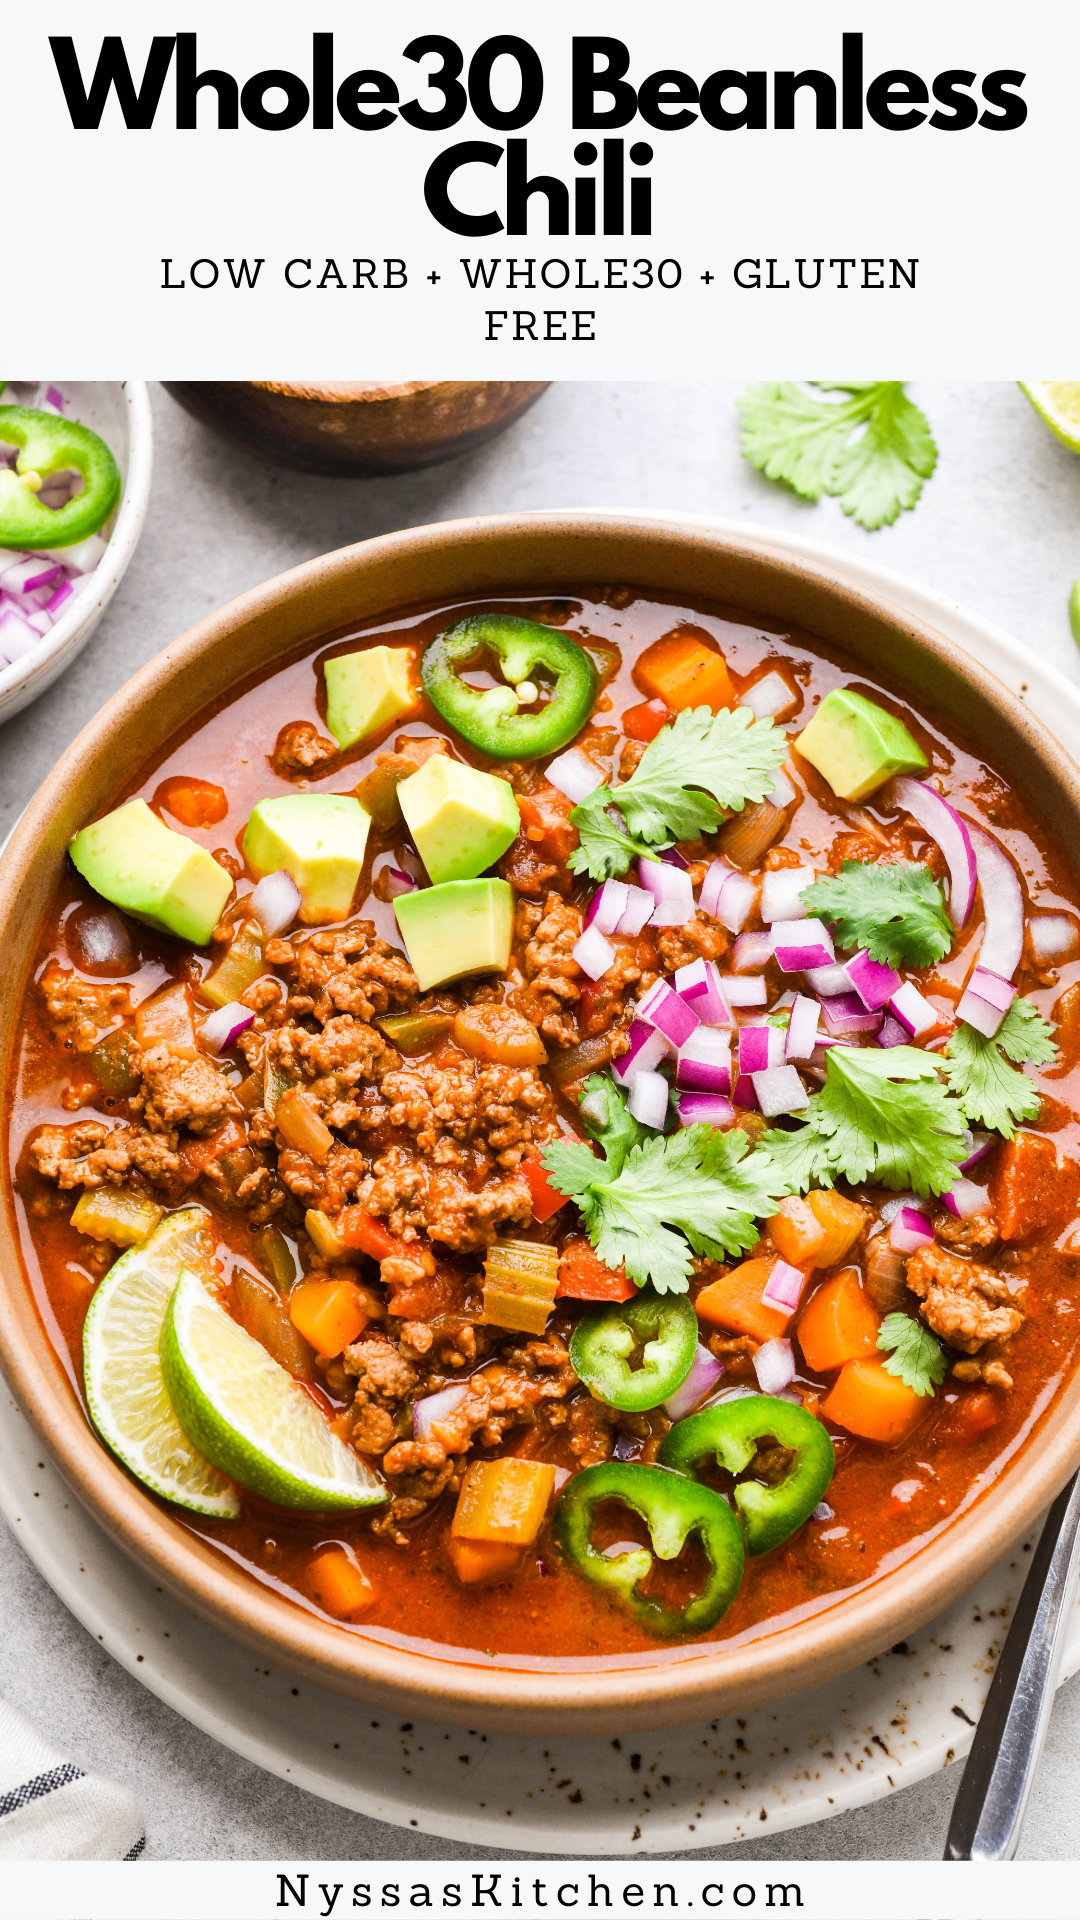 Simple and delicious Whole30 beanless chili is perfect for a cozy night in! Made with nourishing protein, a rainbow of healthy vegetables, and plenty of spices for deep and rich flavor. Easy to make and perfect for the whole family! Whole30, paleo, and gluten free.